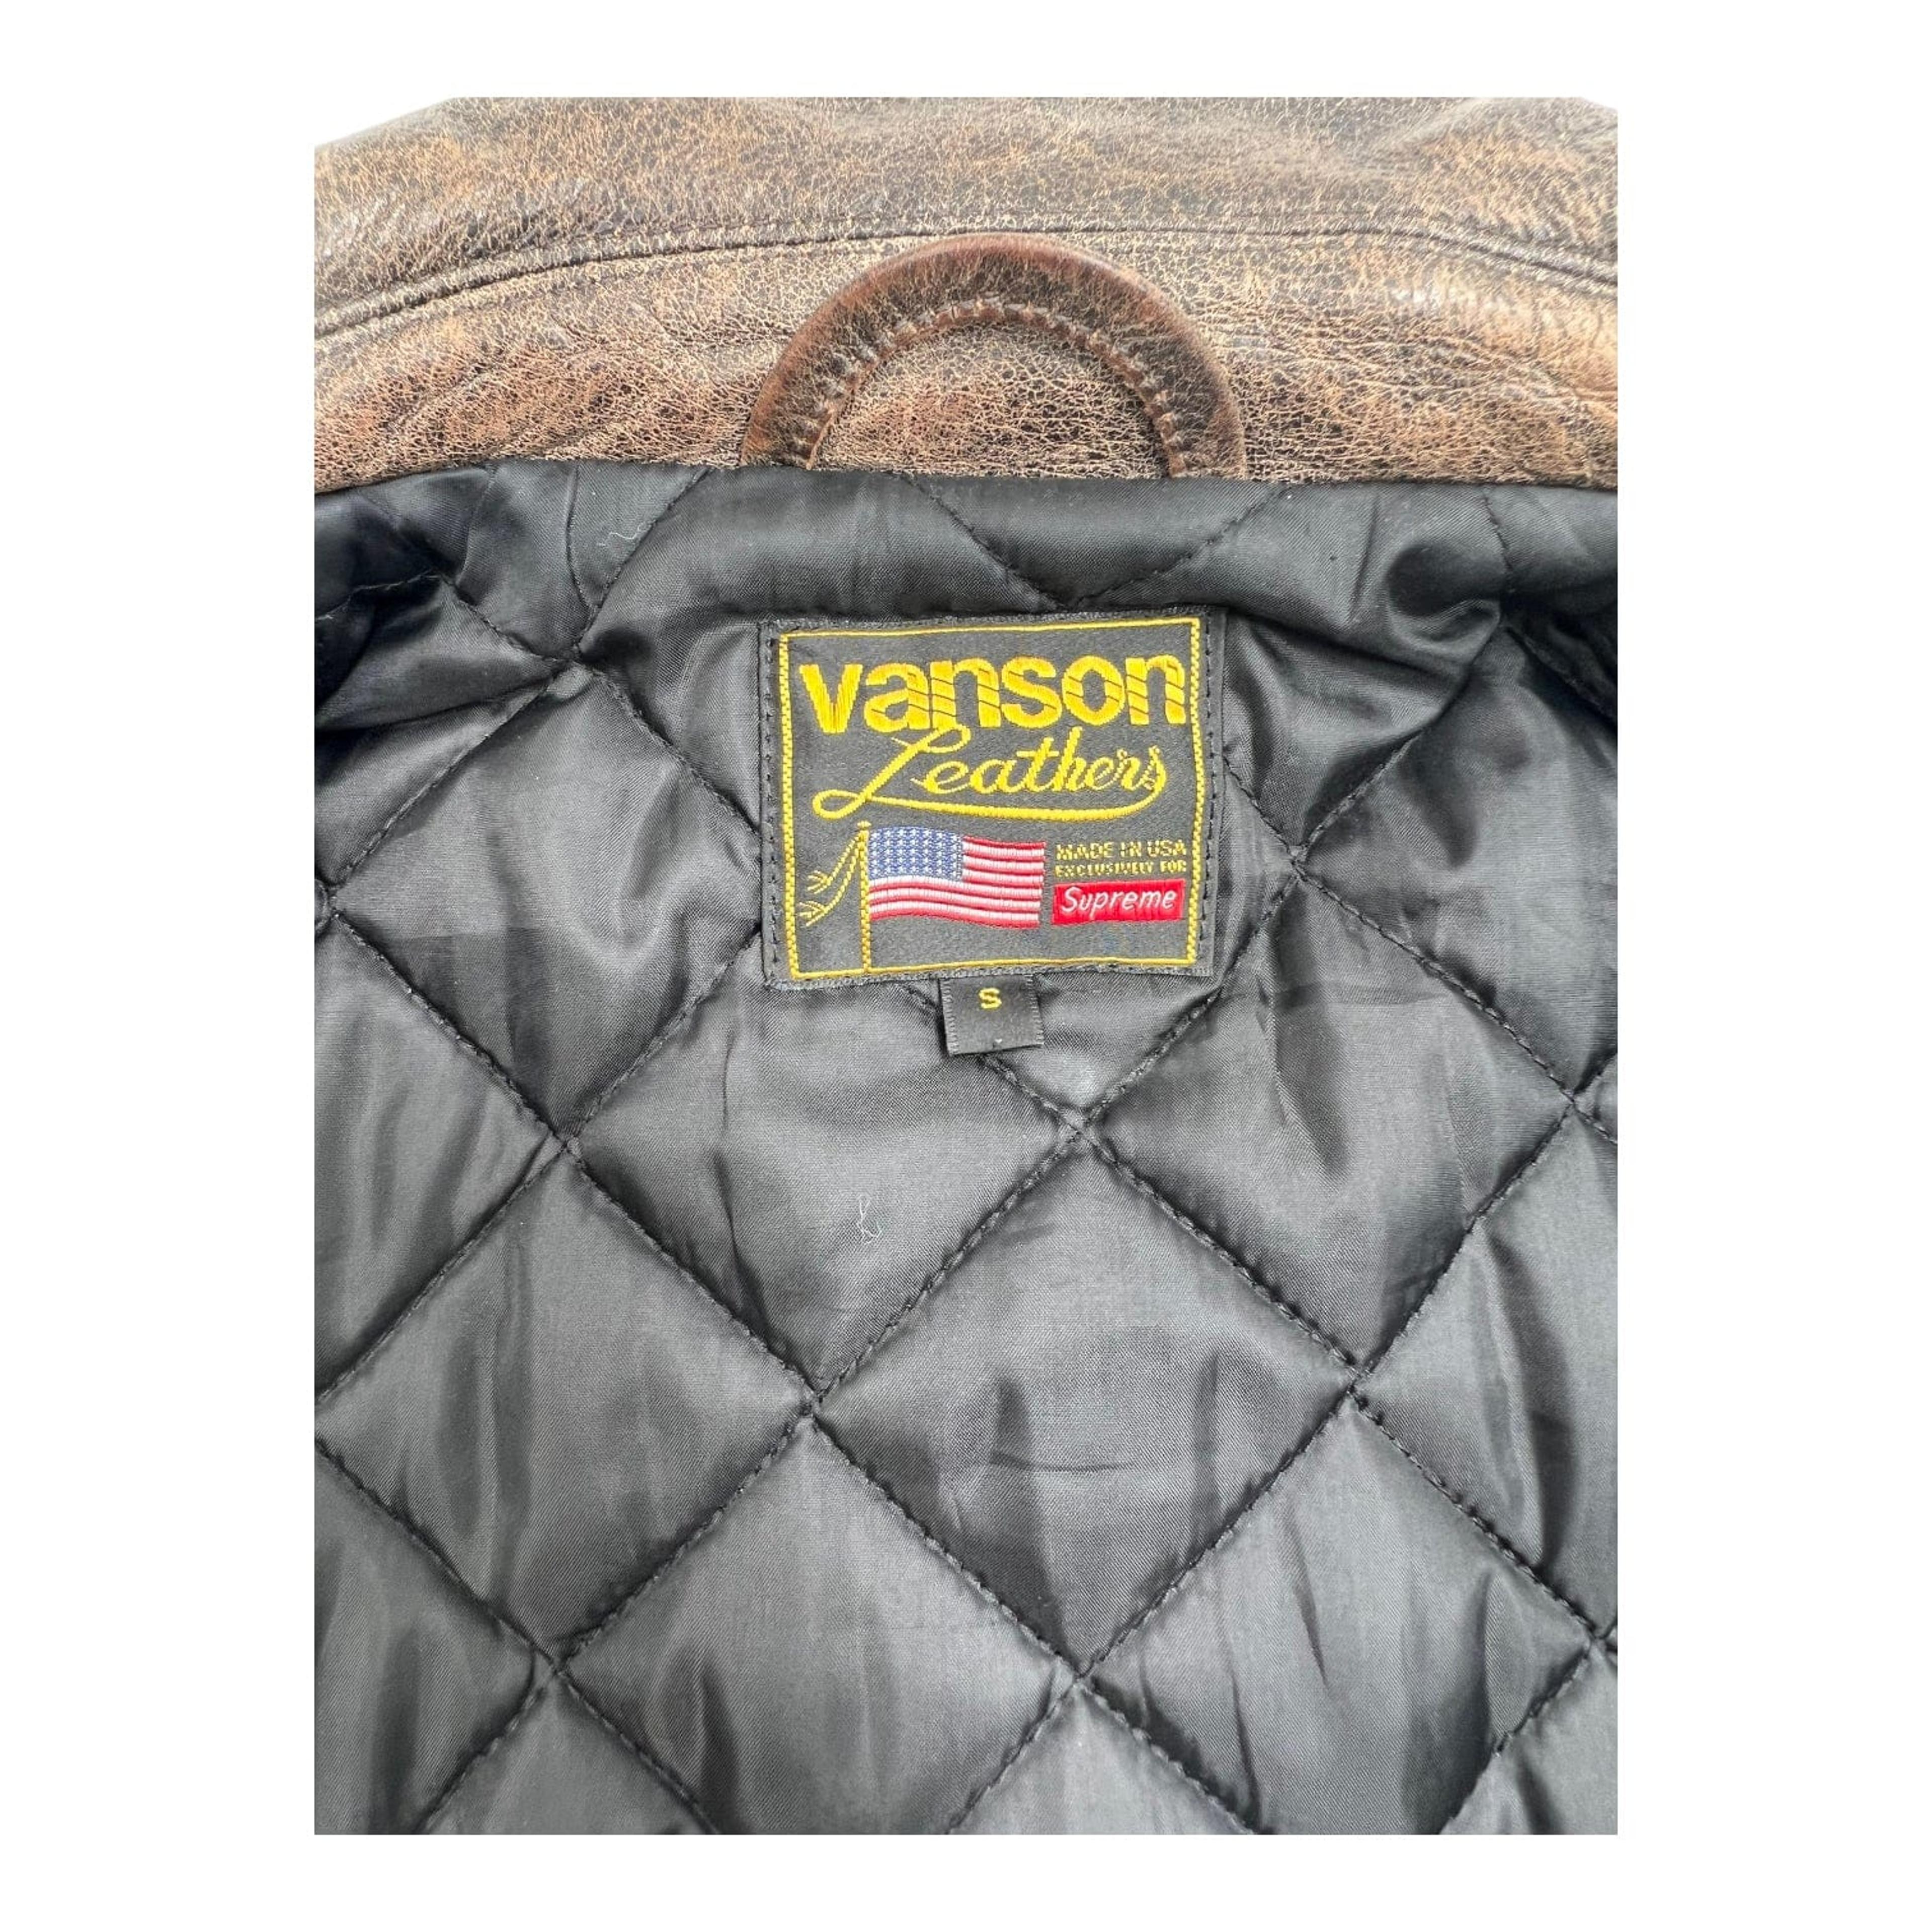 Alternate View 4 of Supreme Vanson Leathers Worn Leather Jacket Brown Pre-Owned